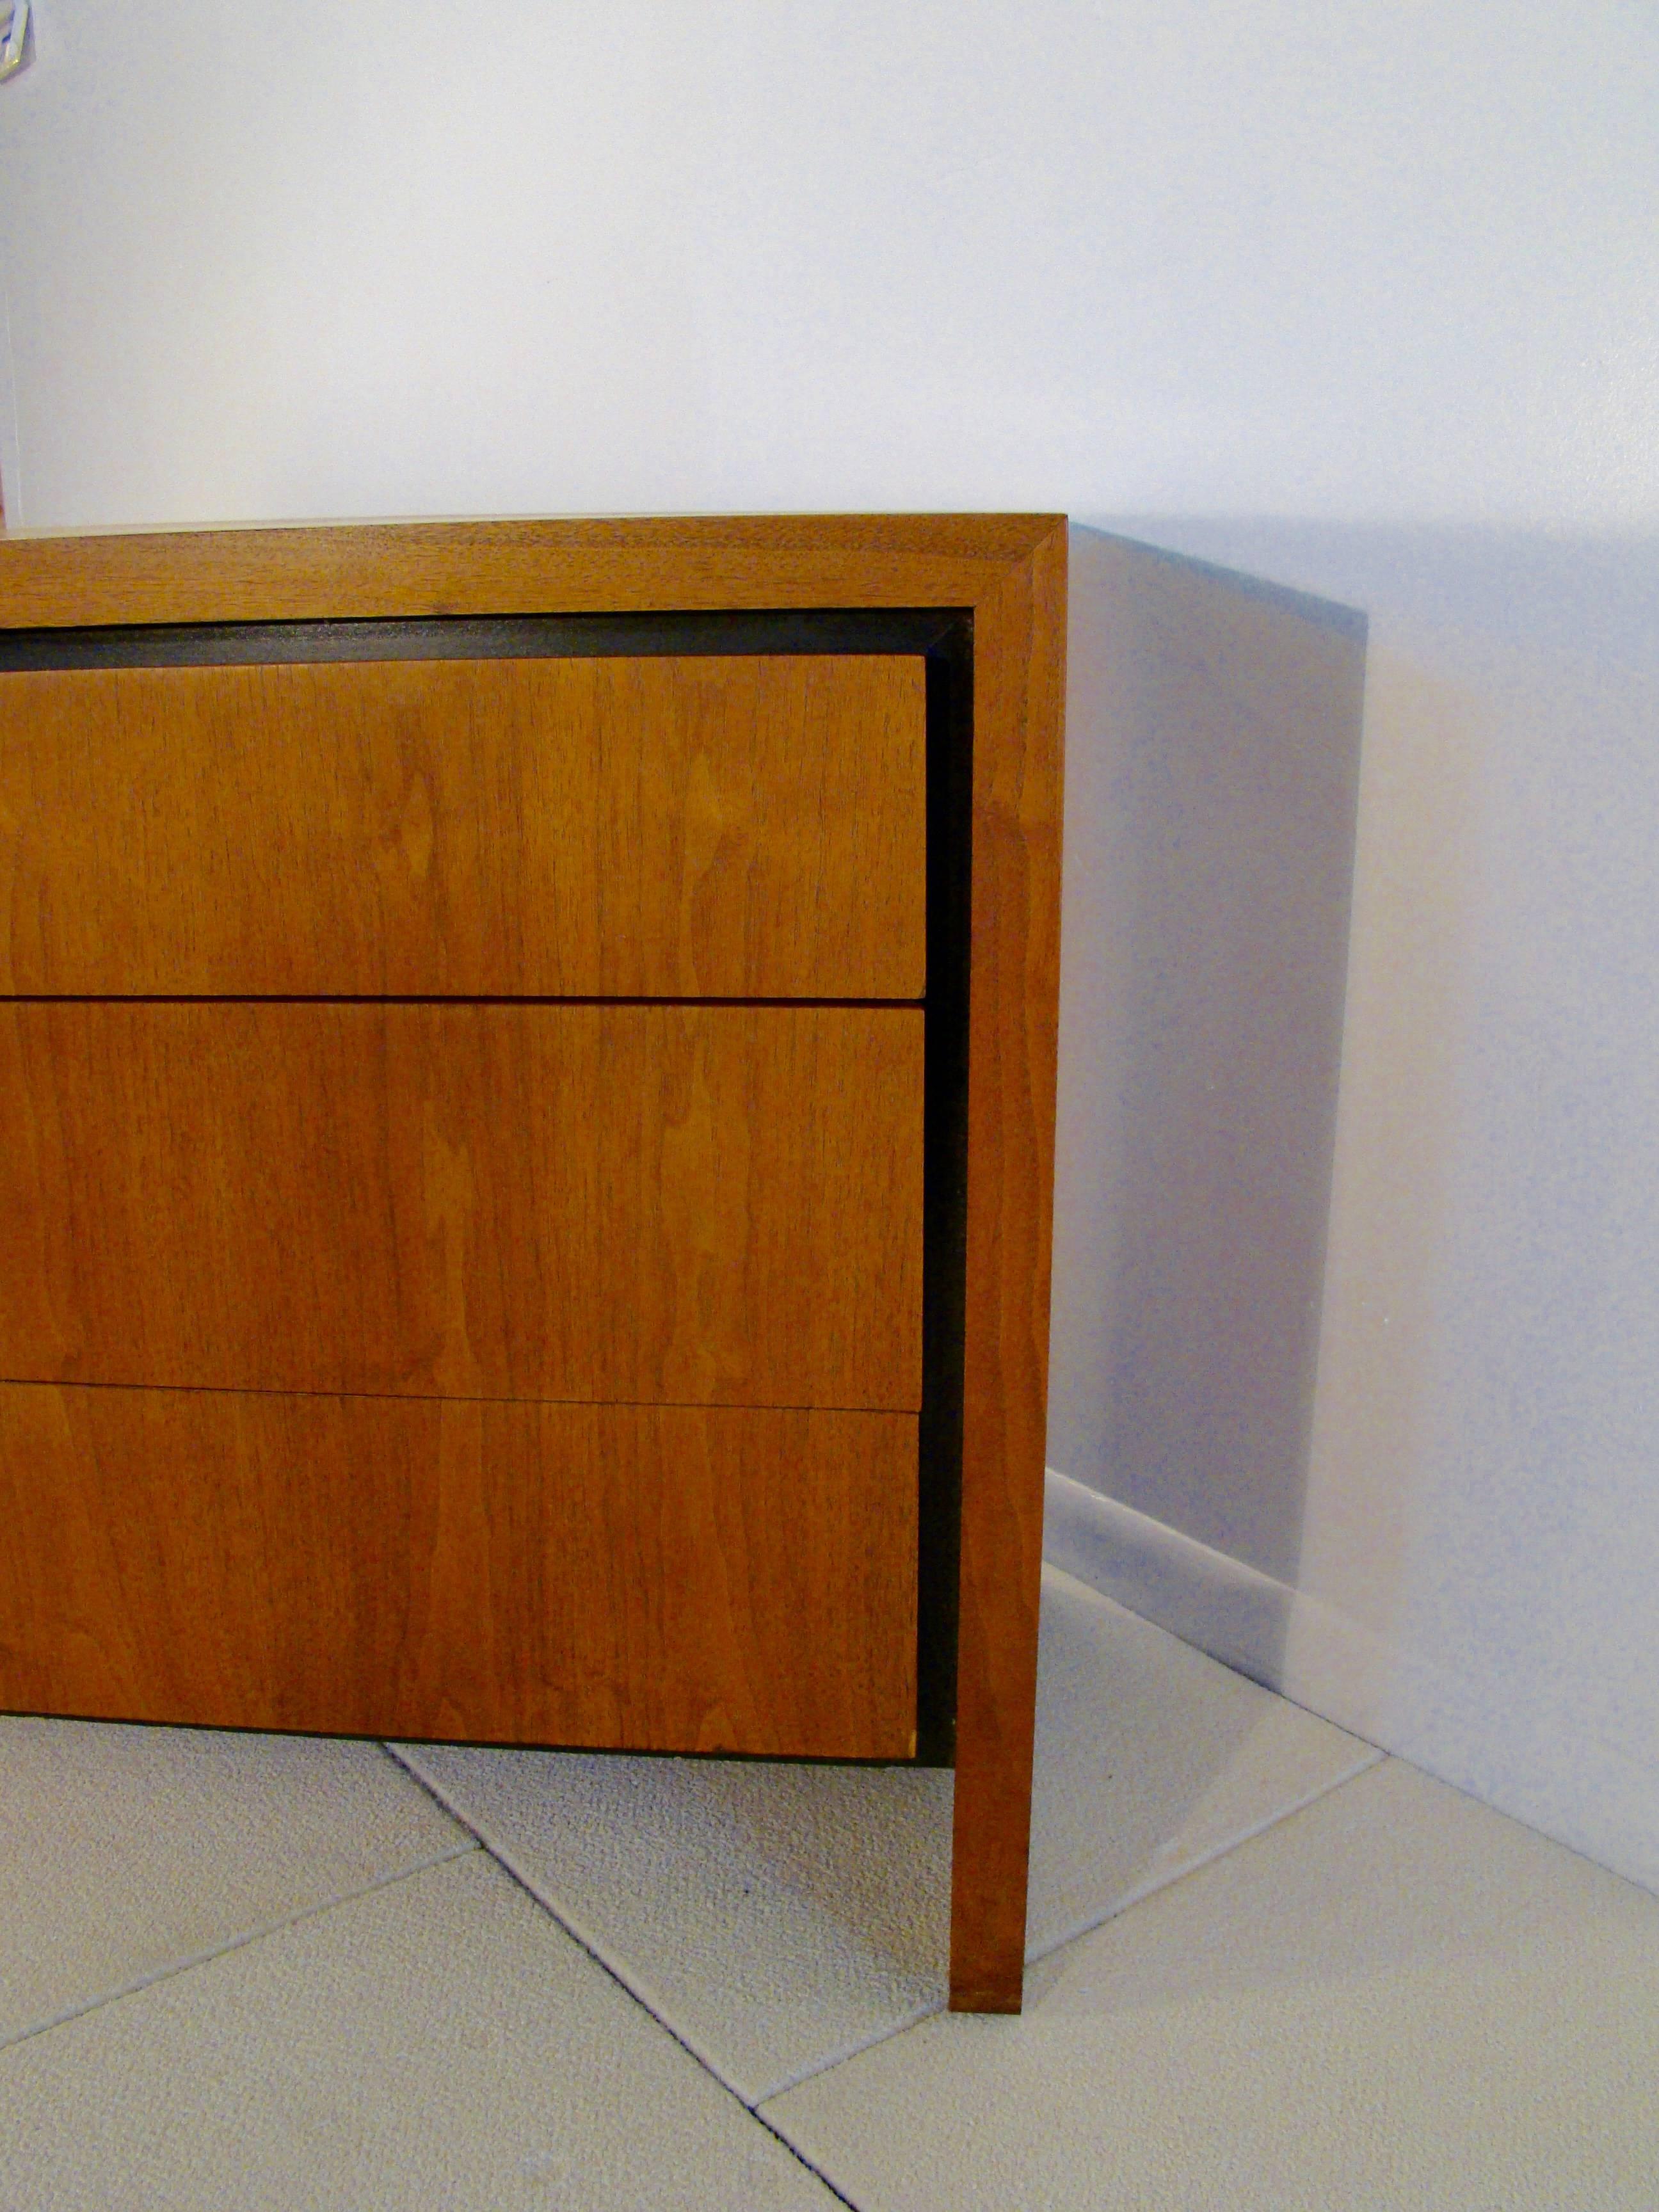 Late 20th Century Walnut and Black Six-Drawer Dresser Attributed to Milo Baughman for Dillingham